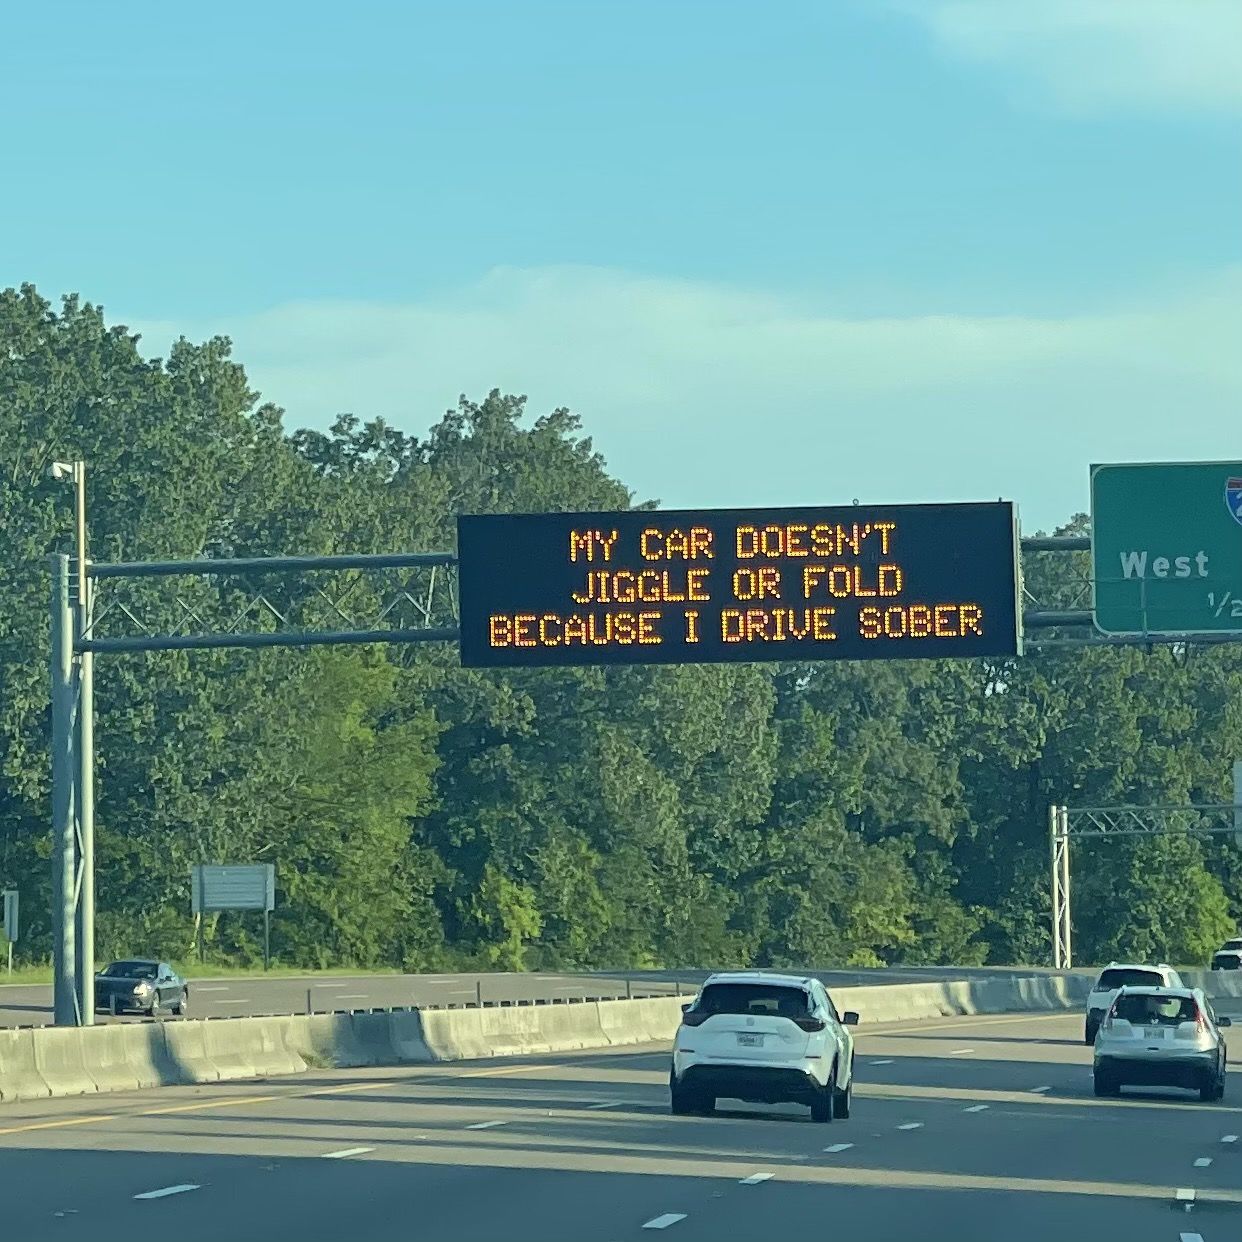 Someone at the DOT has fun with their job…